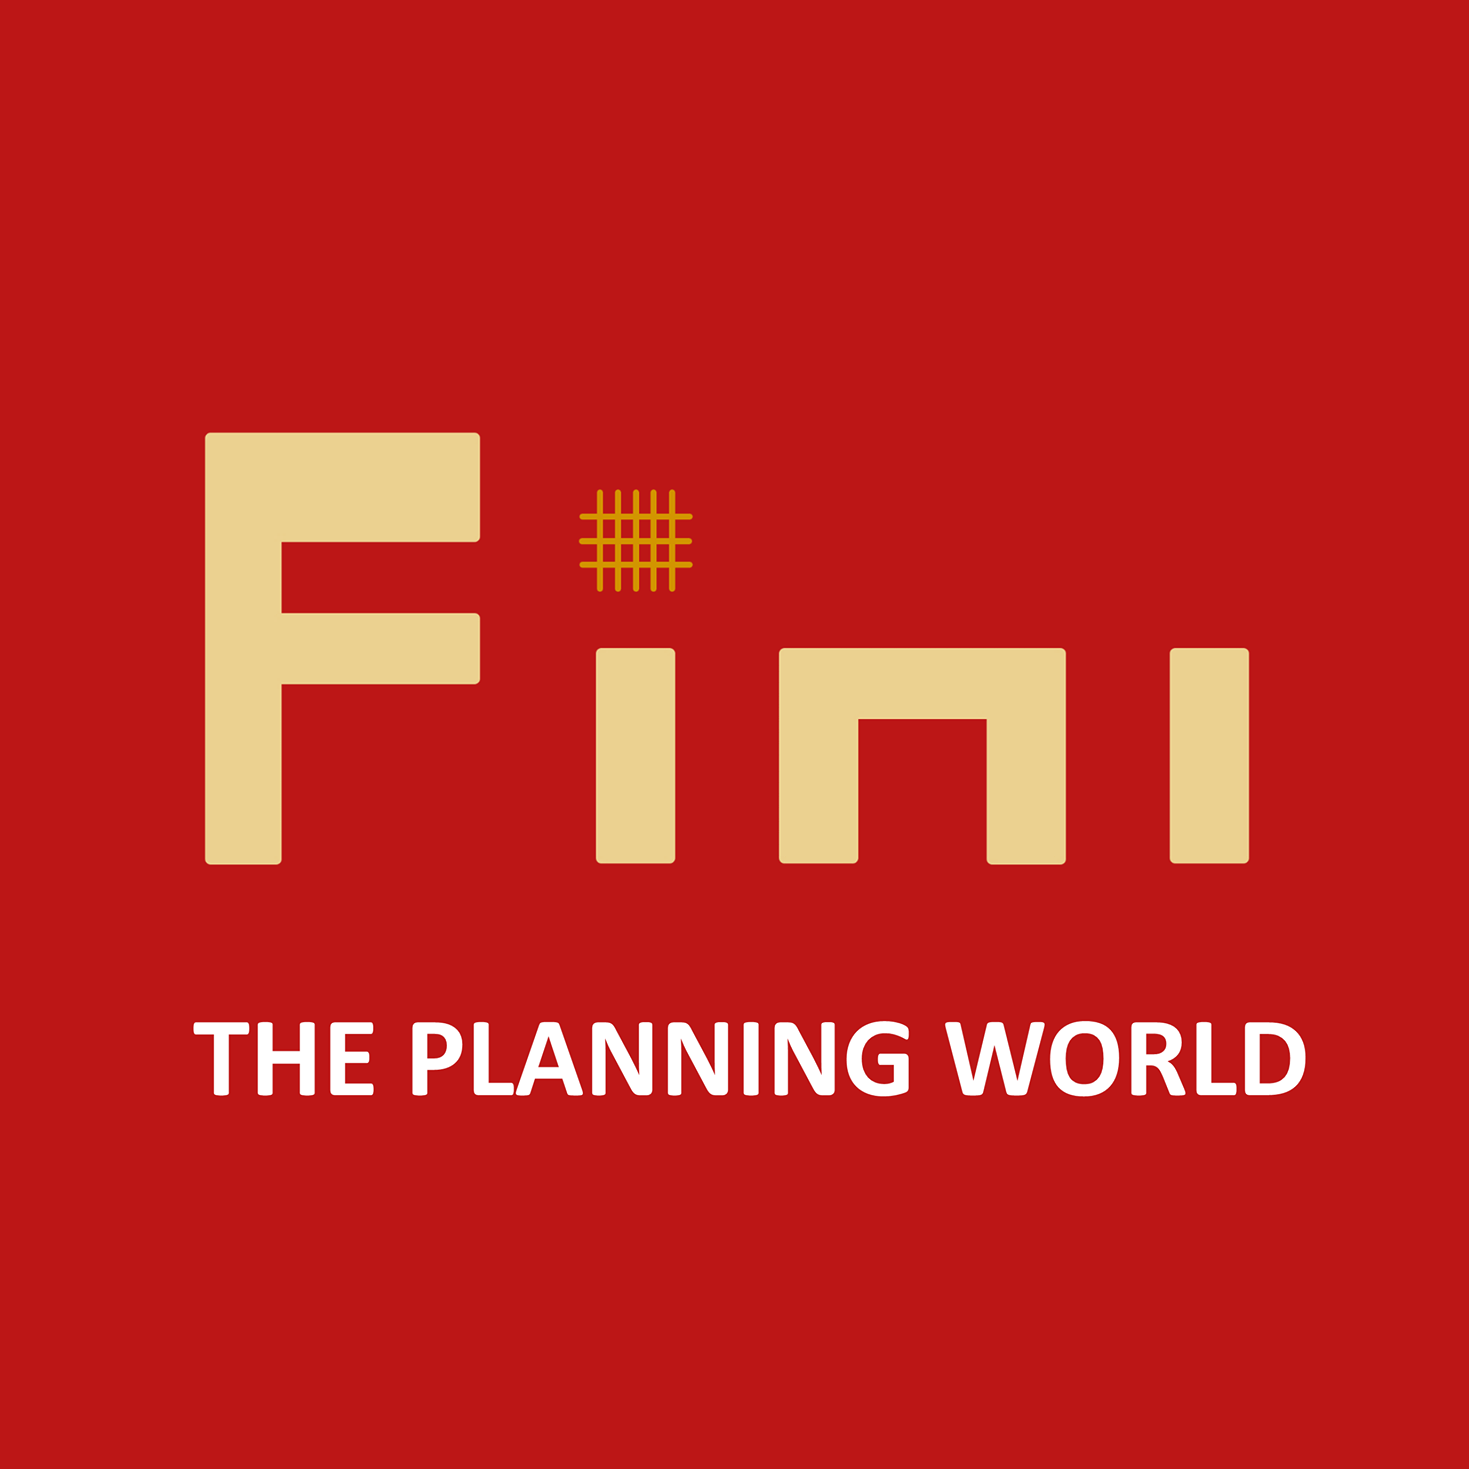 Fini the planning world|Architect|Professional Services